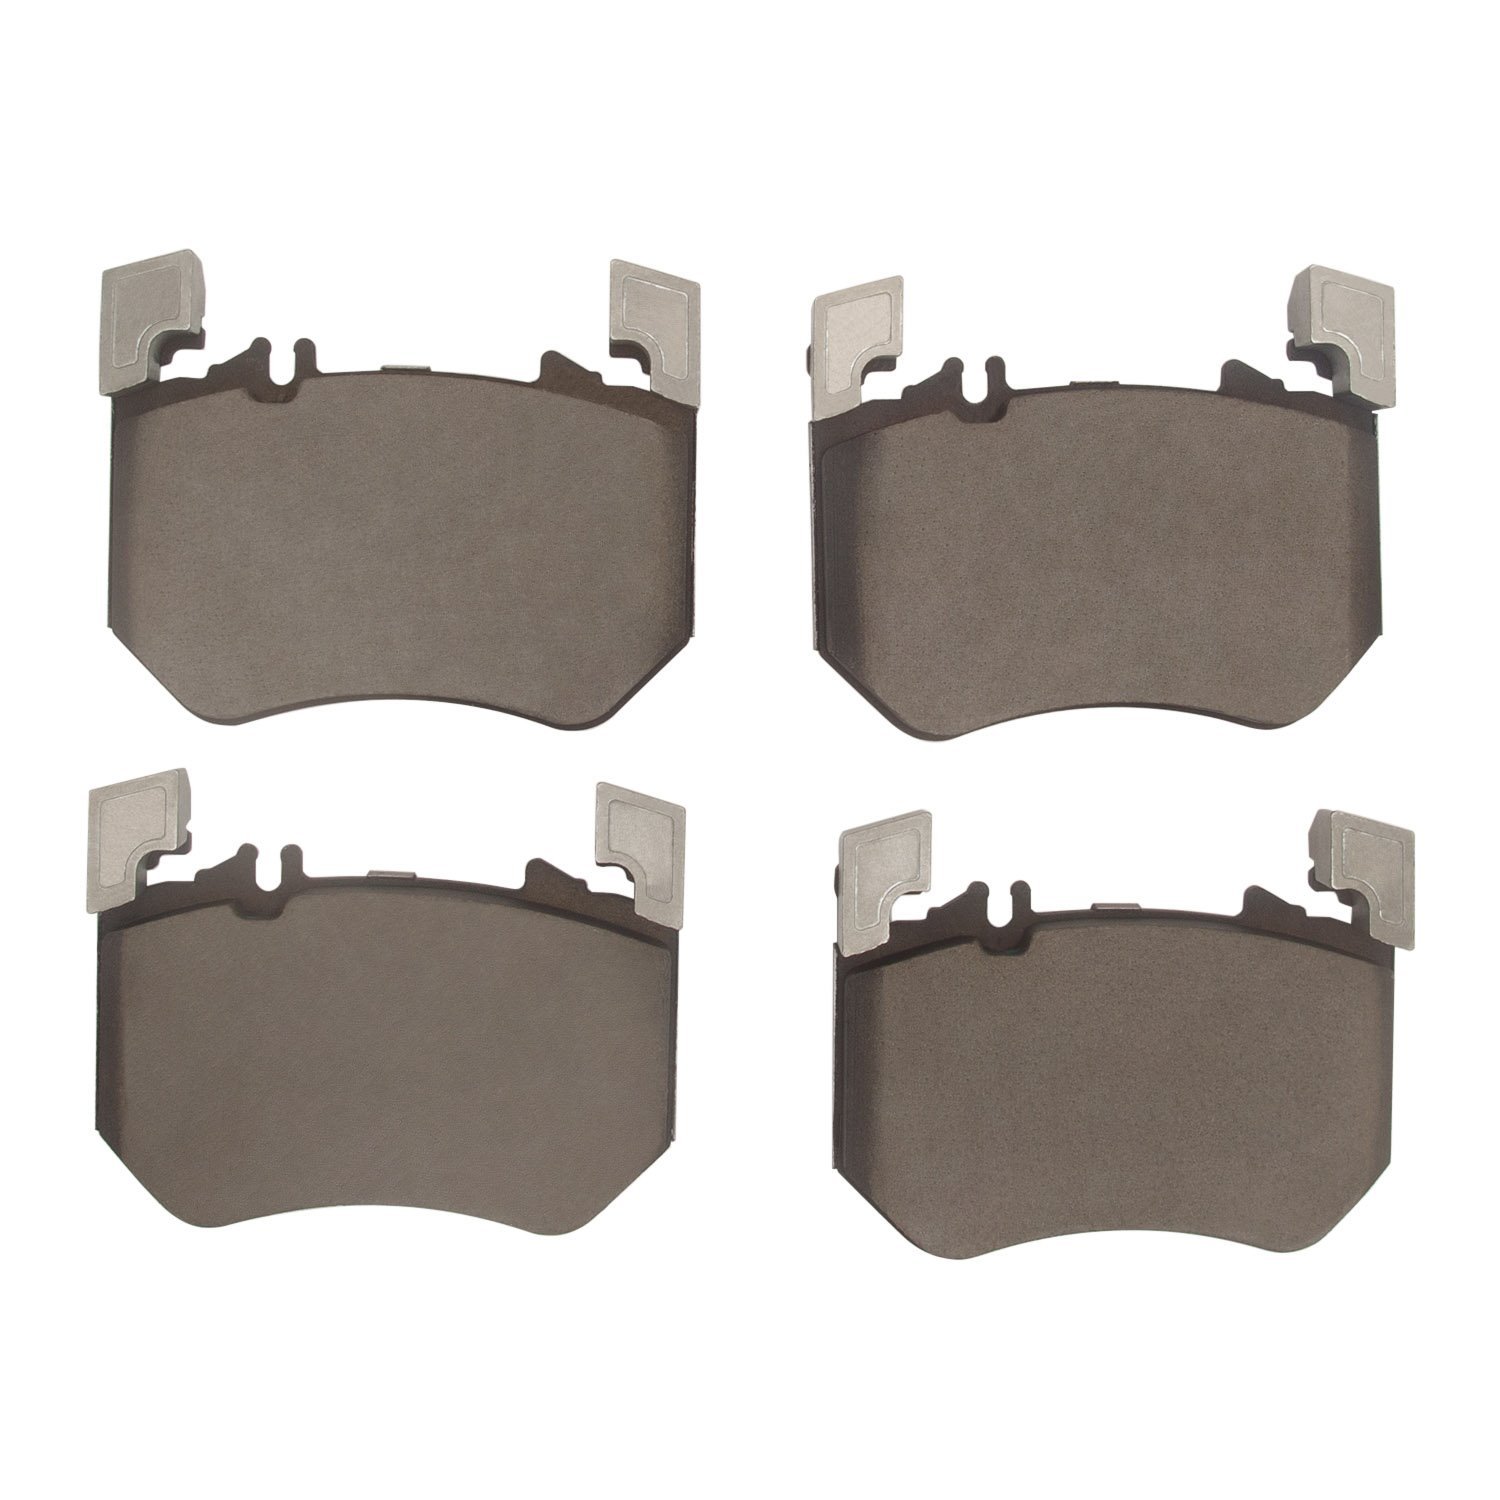 1551-2455-00 5000 Advanced Ceramic Brake Pads, Fits Select Mercedes-Benz, Position: Front